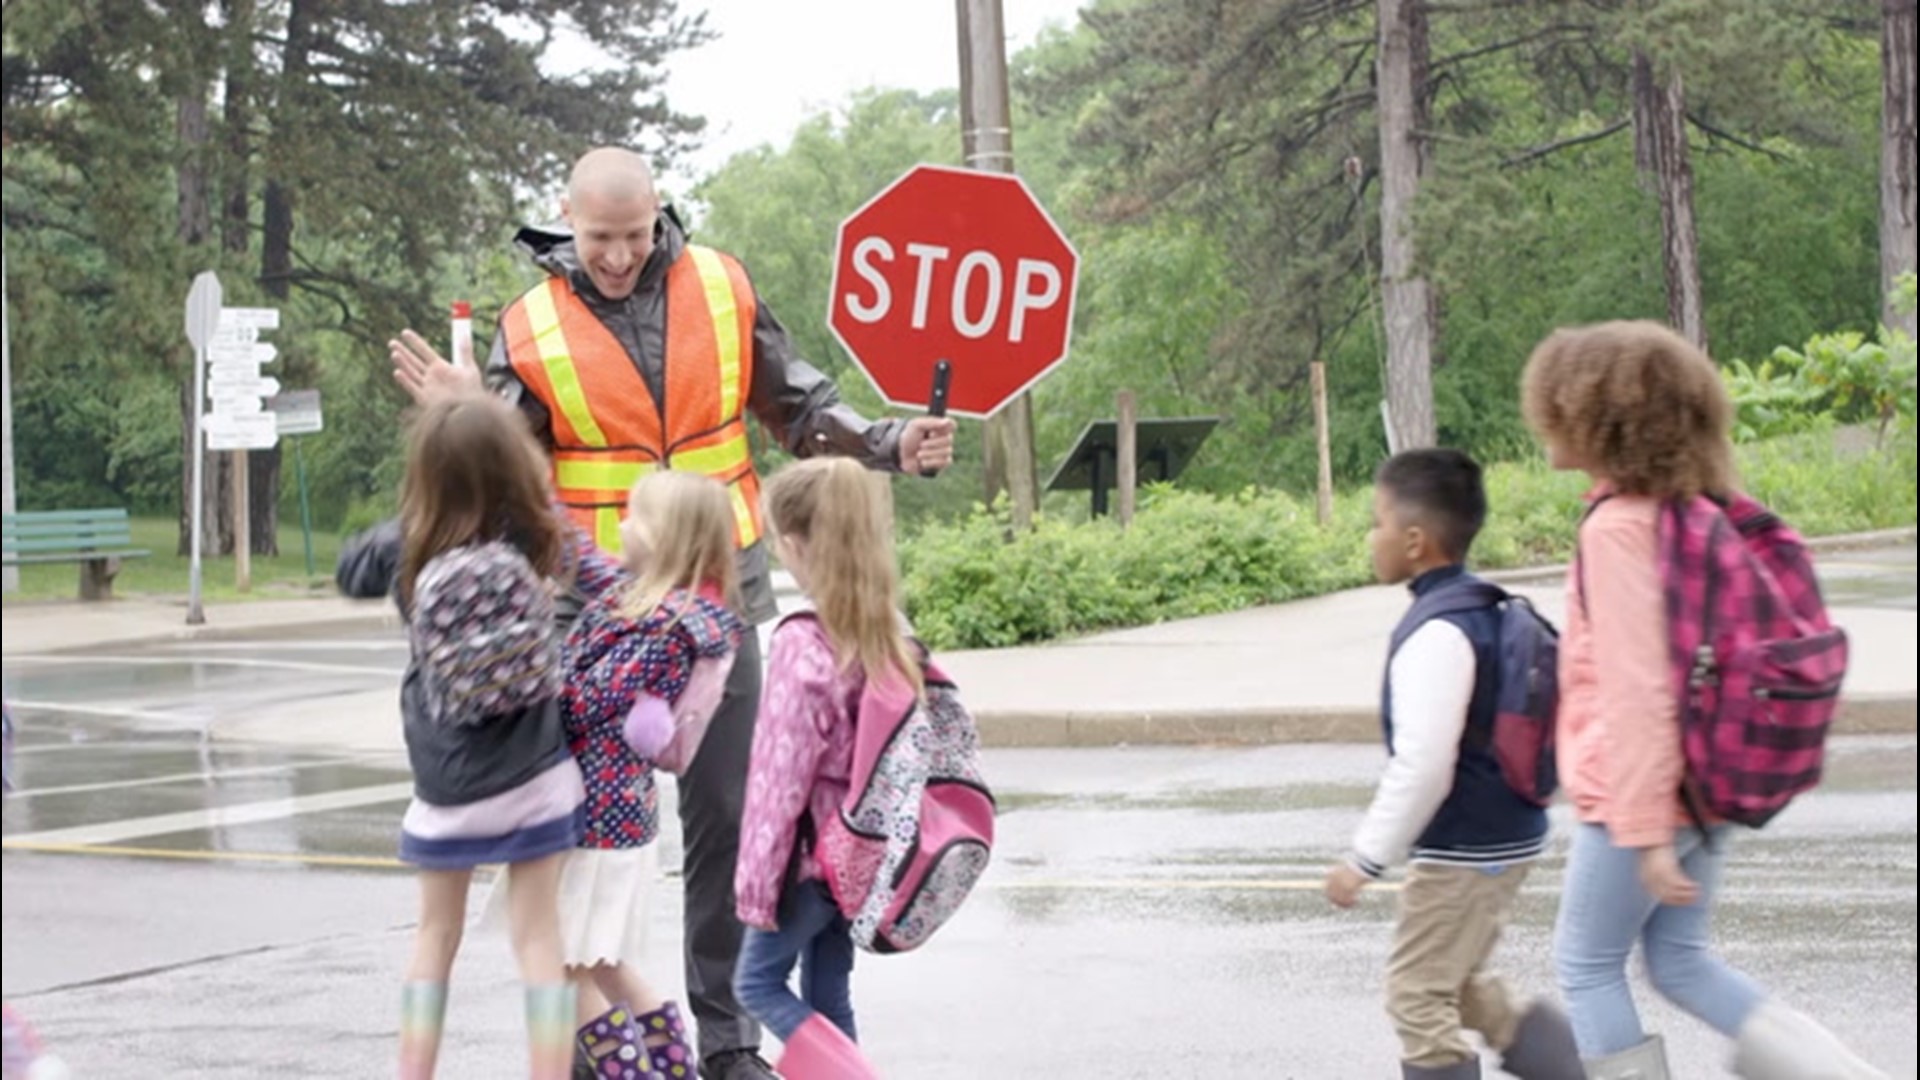 AccuWeather's Dexter Henry looks at how school crossing guards weather the elements to protect students.